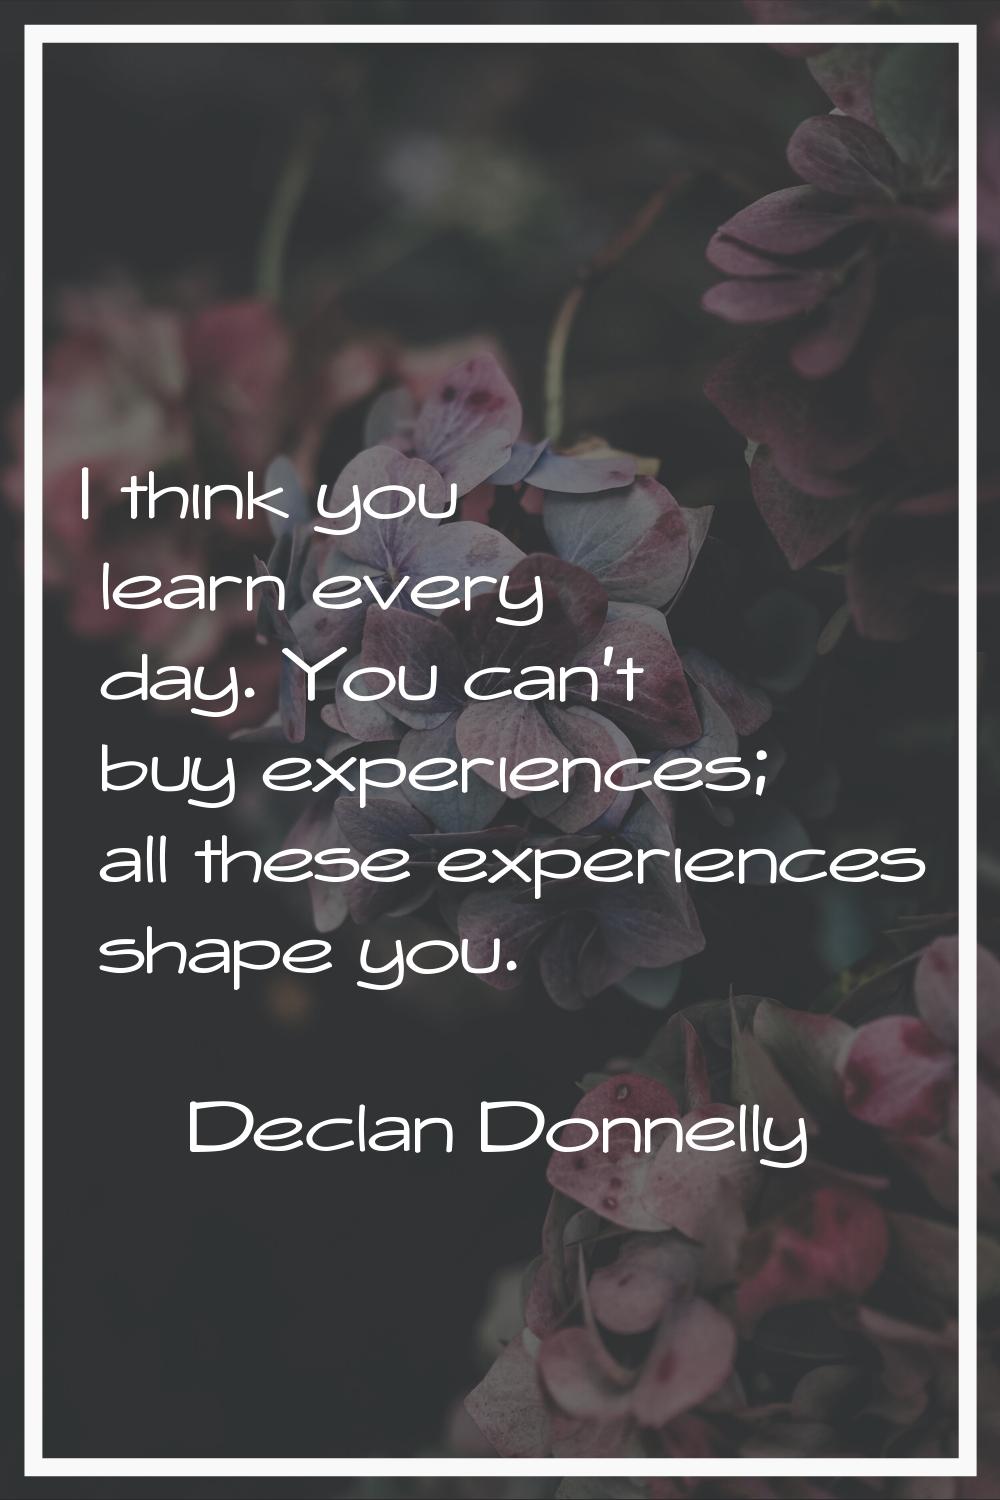 I think you learn every day. You can't buy experiences; all these experiences shape you.